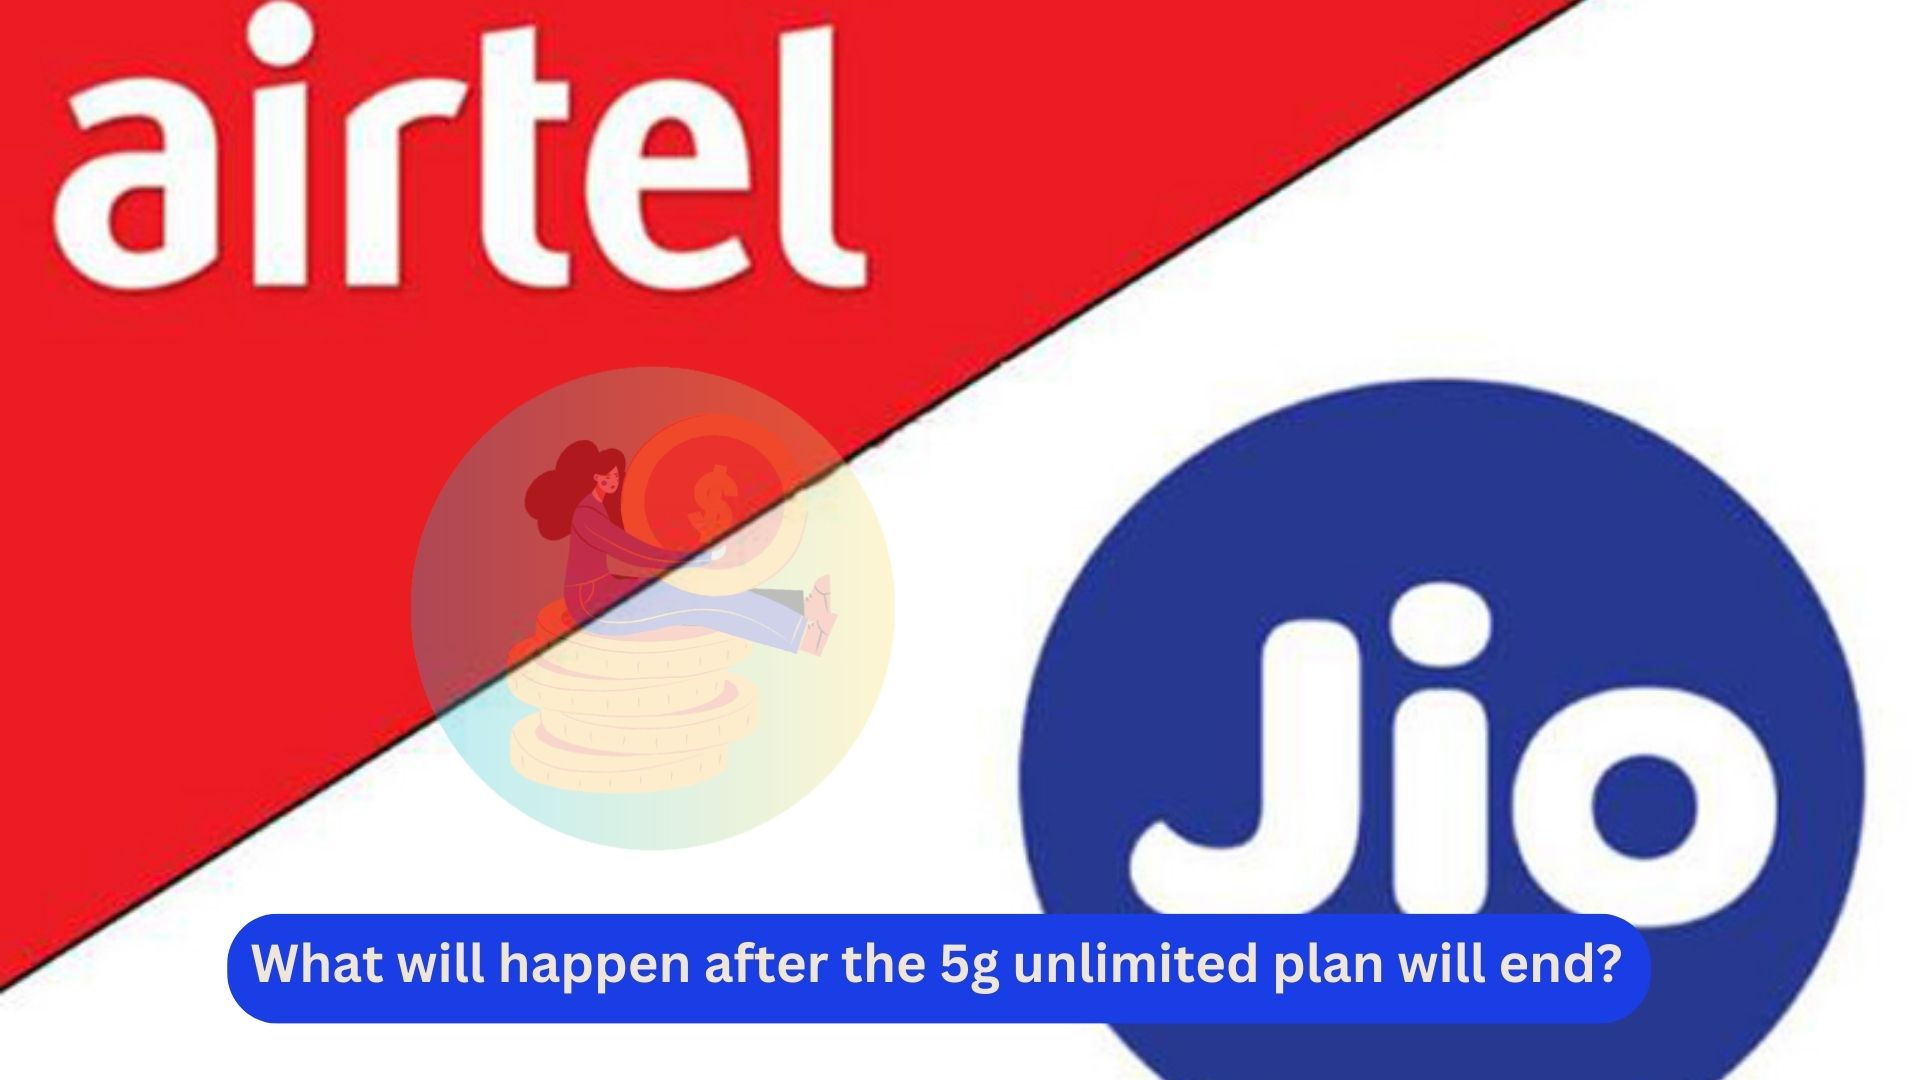 Latest news Jio and Airtel 5g unlimited plan will end (1)